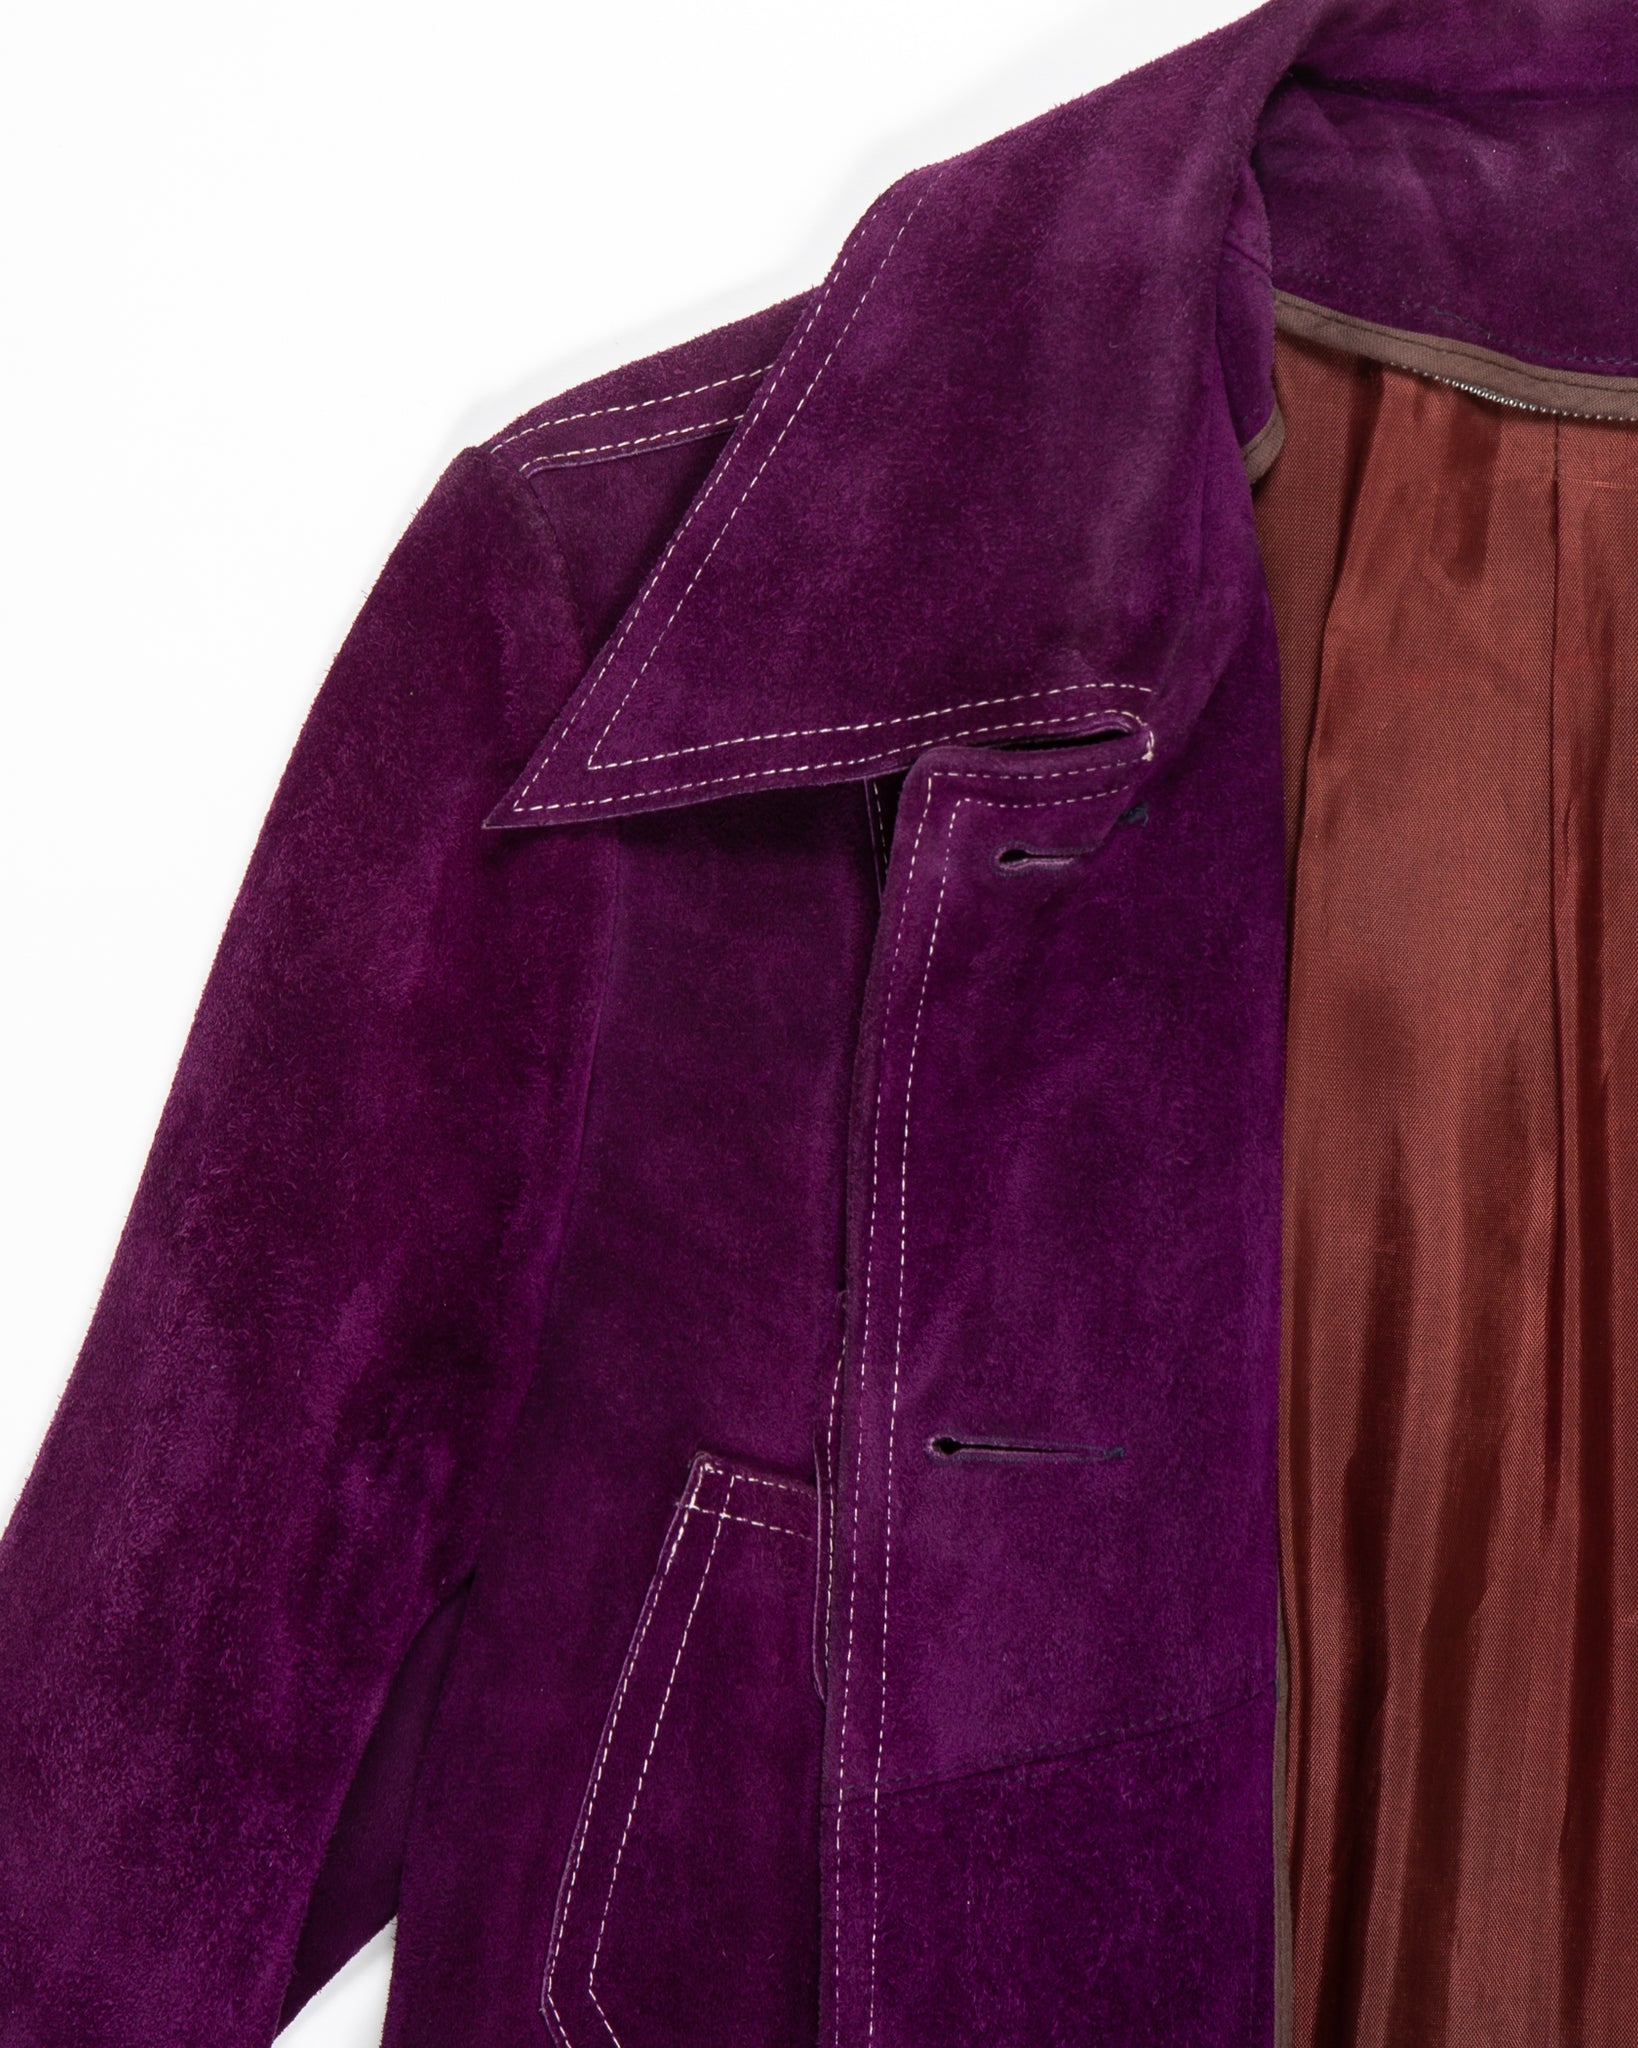 1970s Purple Suede Jacket with White Stitching – nouveaurichevintage